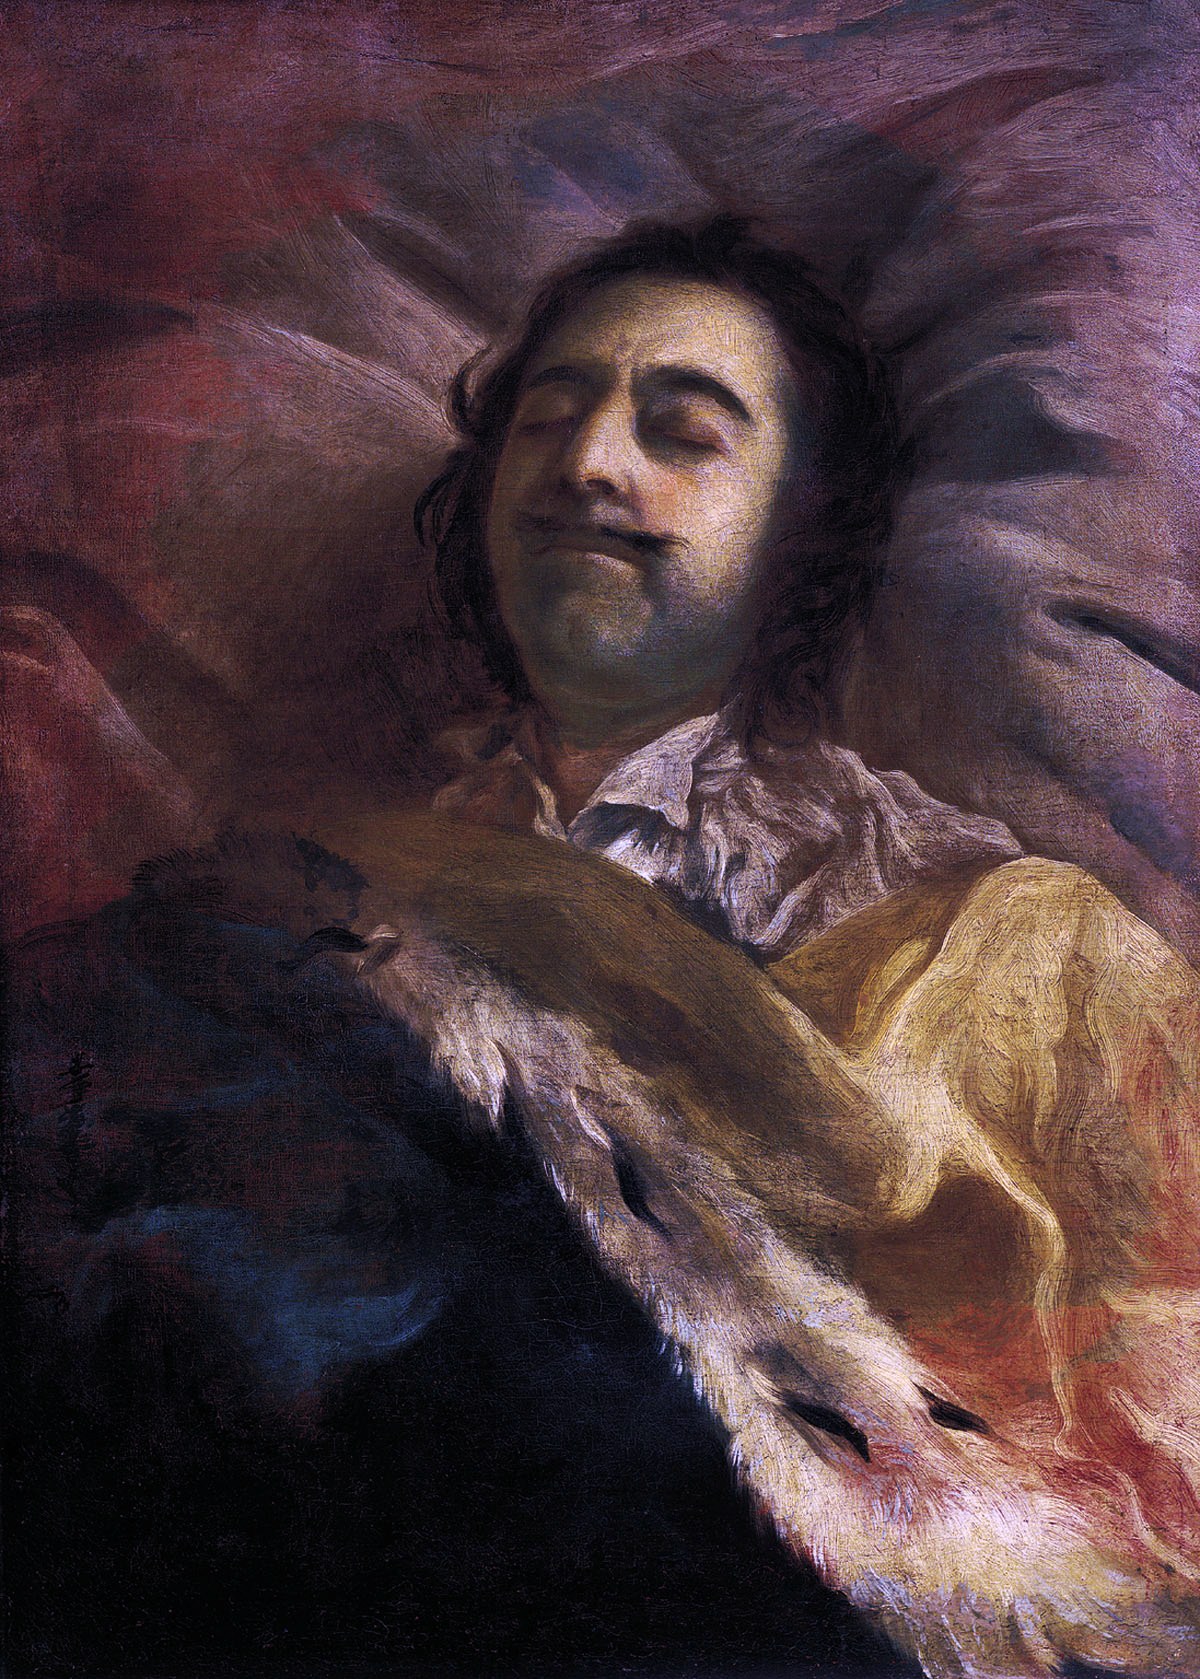 deathbed_portrait_of_peter_i_by_i_nikitin_1725_russian_museum.jpg